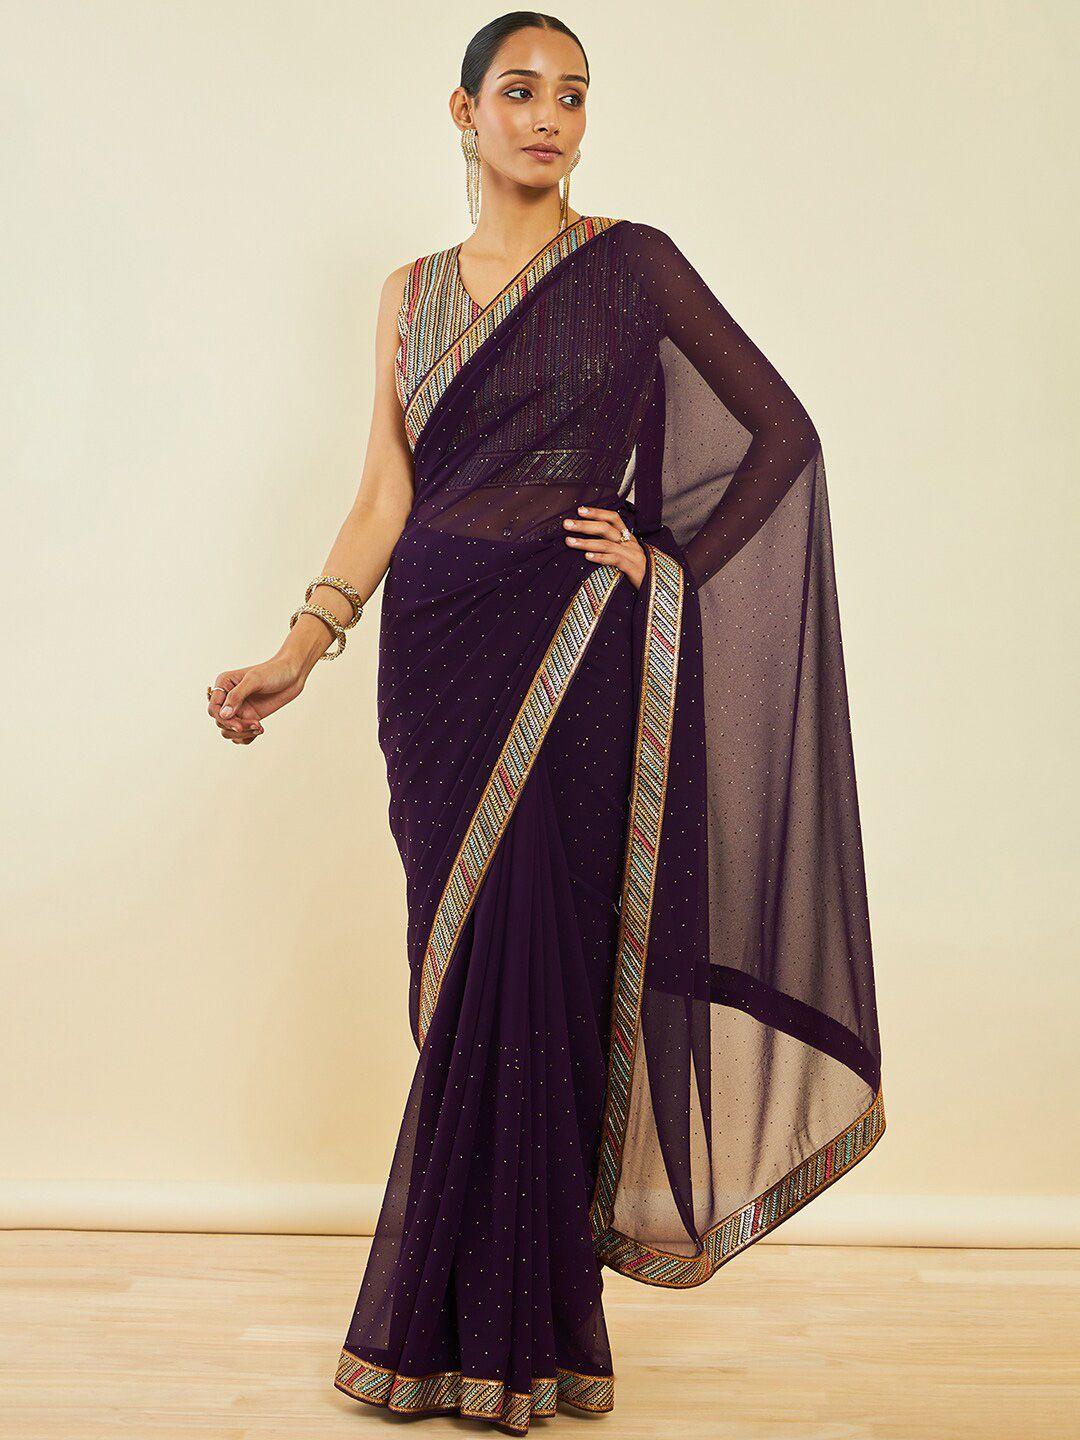 soch-embellished-beads-and-stones-saree